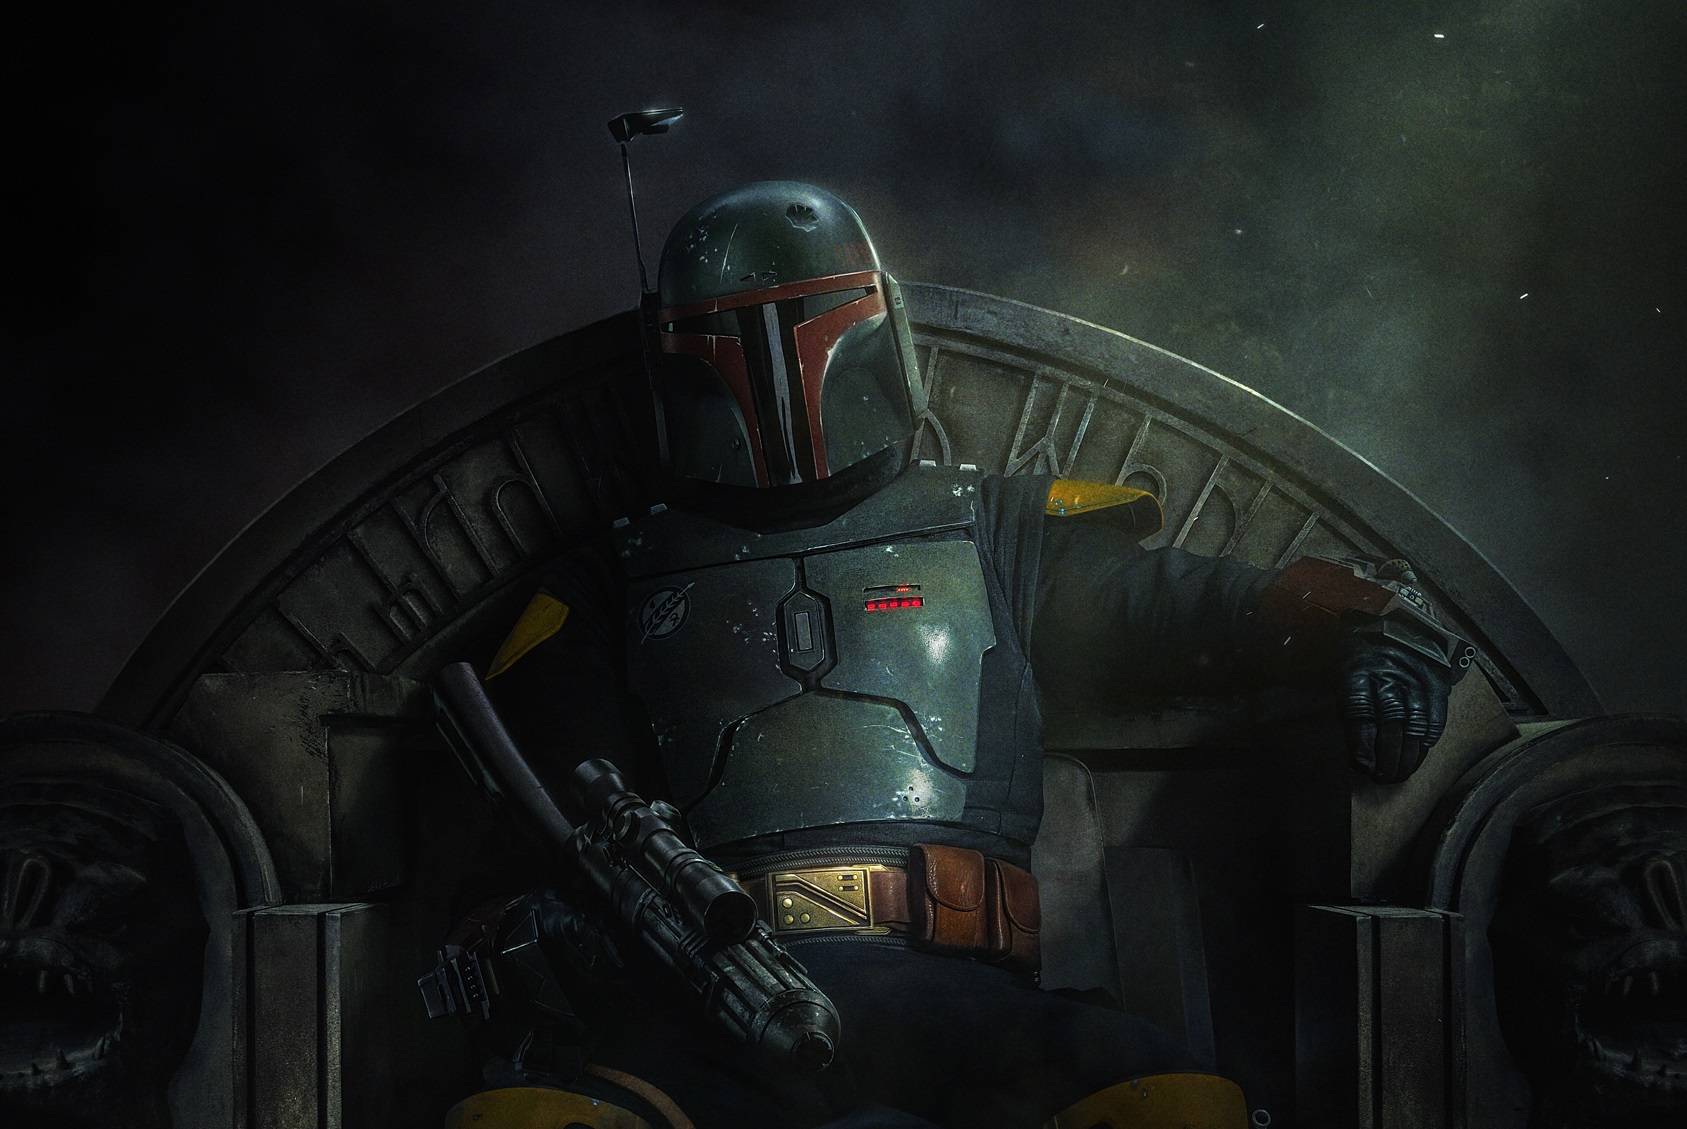 ‘The Book of Boba Fett’ release date announced for Disney Plus